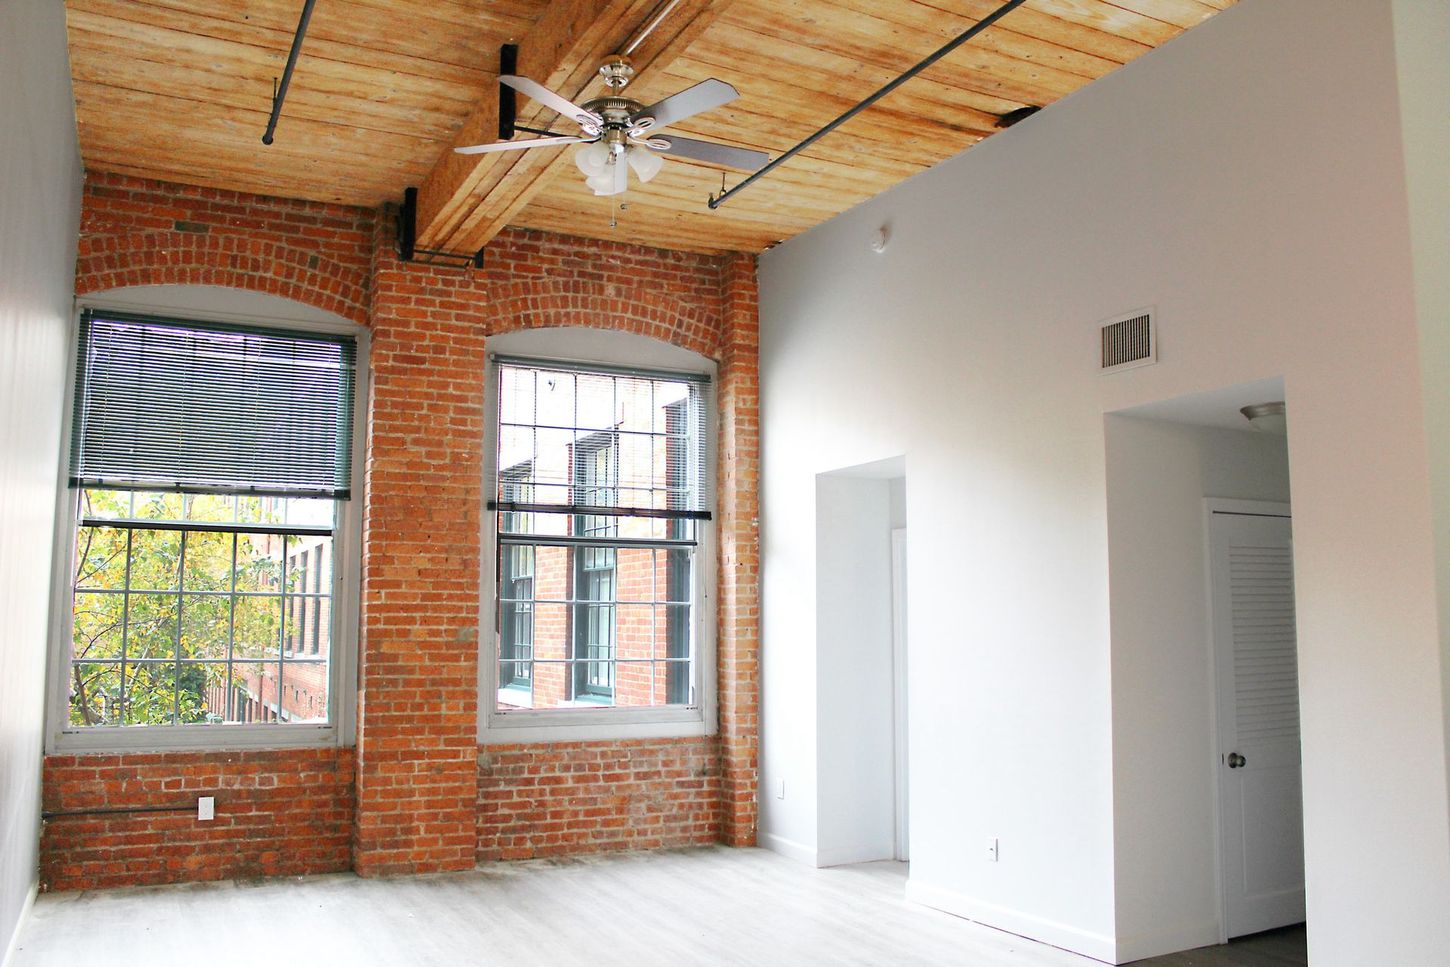 An empty room with brick walls and a ceiling fan